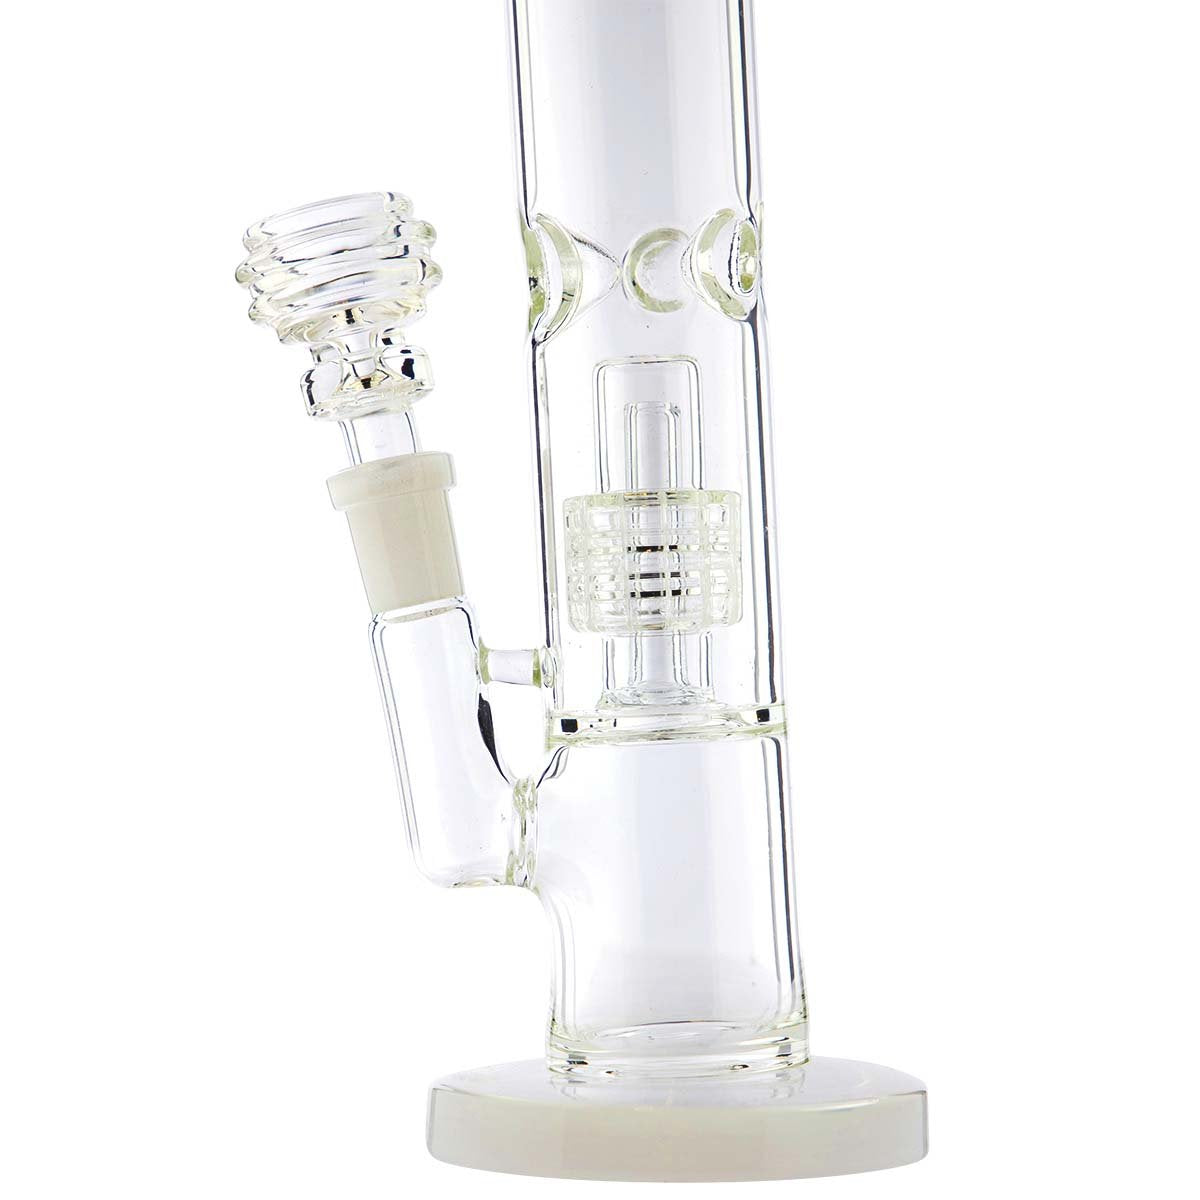 Waterpipe G/g Conical Showerhead 8 14Mm Female With Bowl And Banger